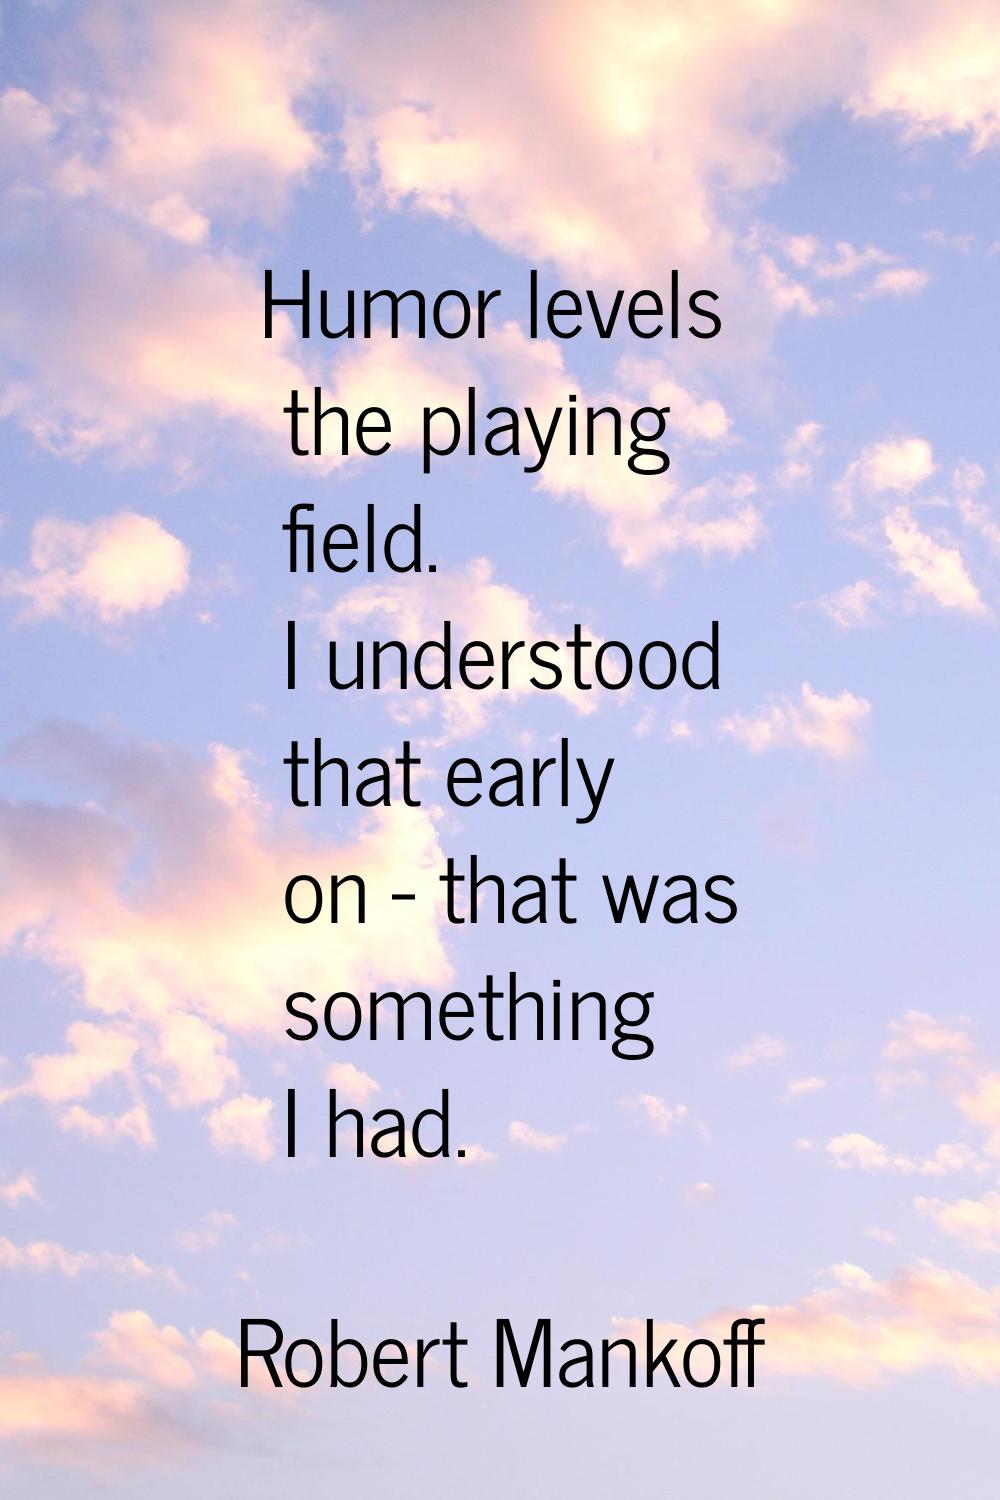 Humor levels the playing field. I understood that early on - that was something I had.